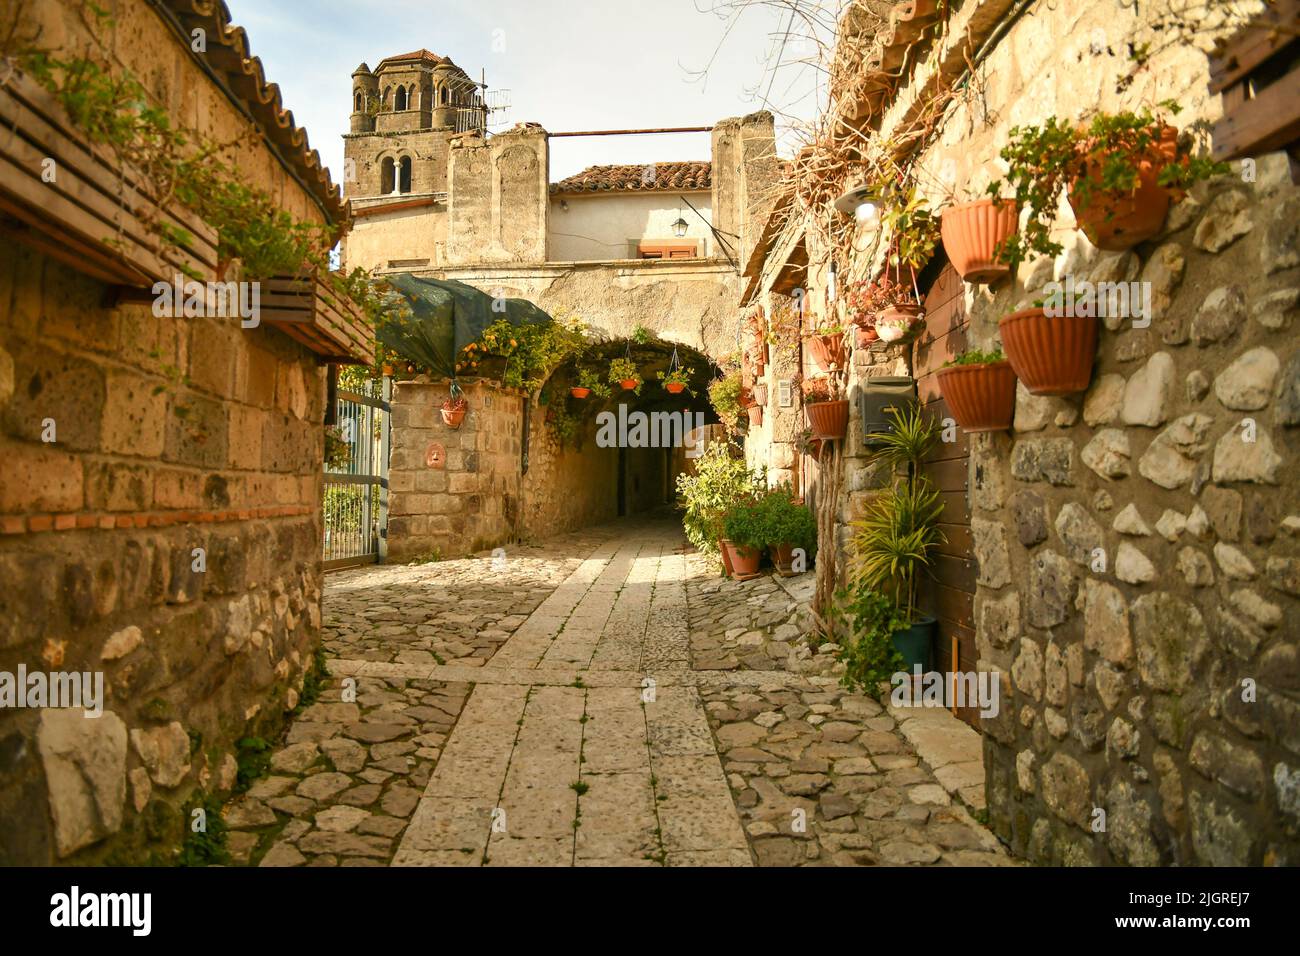 A narrow street among the old stone houses of the oldest district of Caserta, Italy Stock Photo